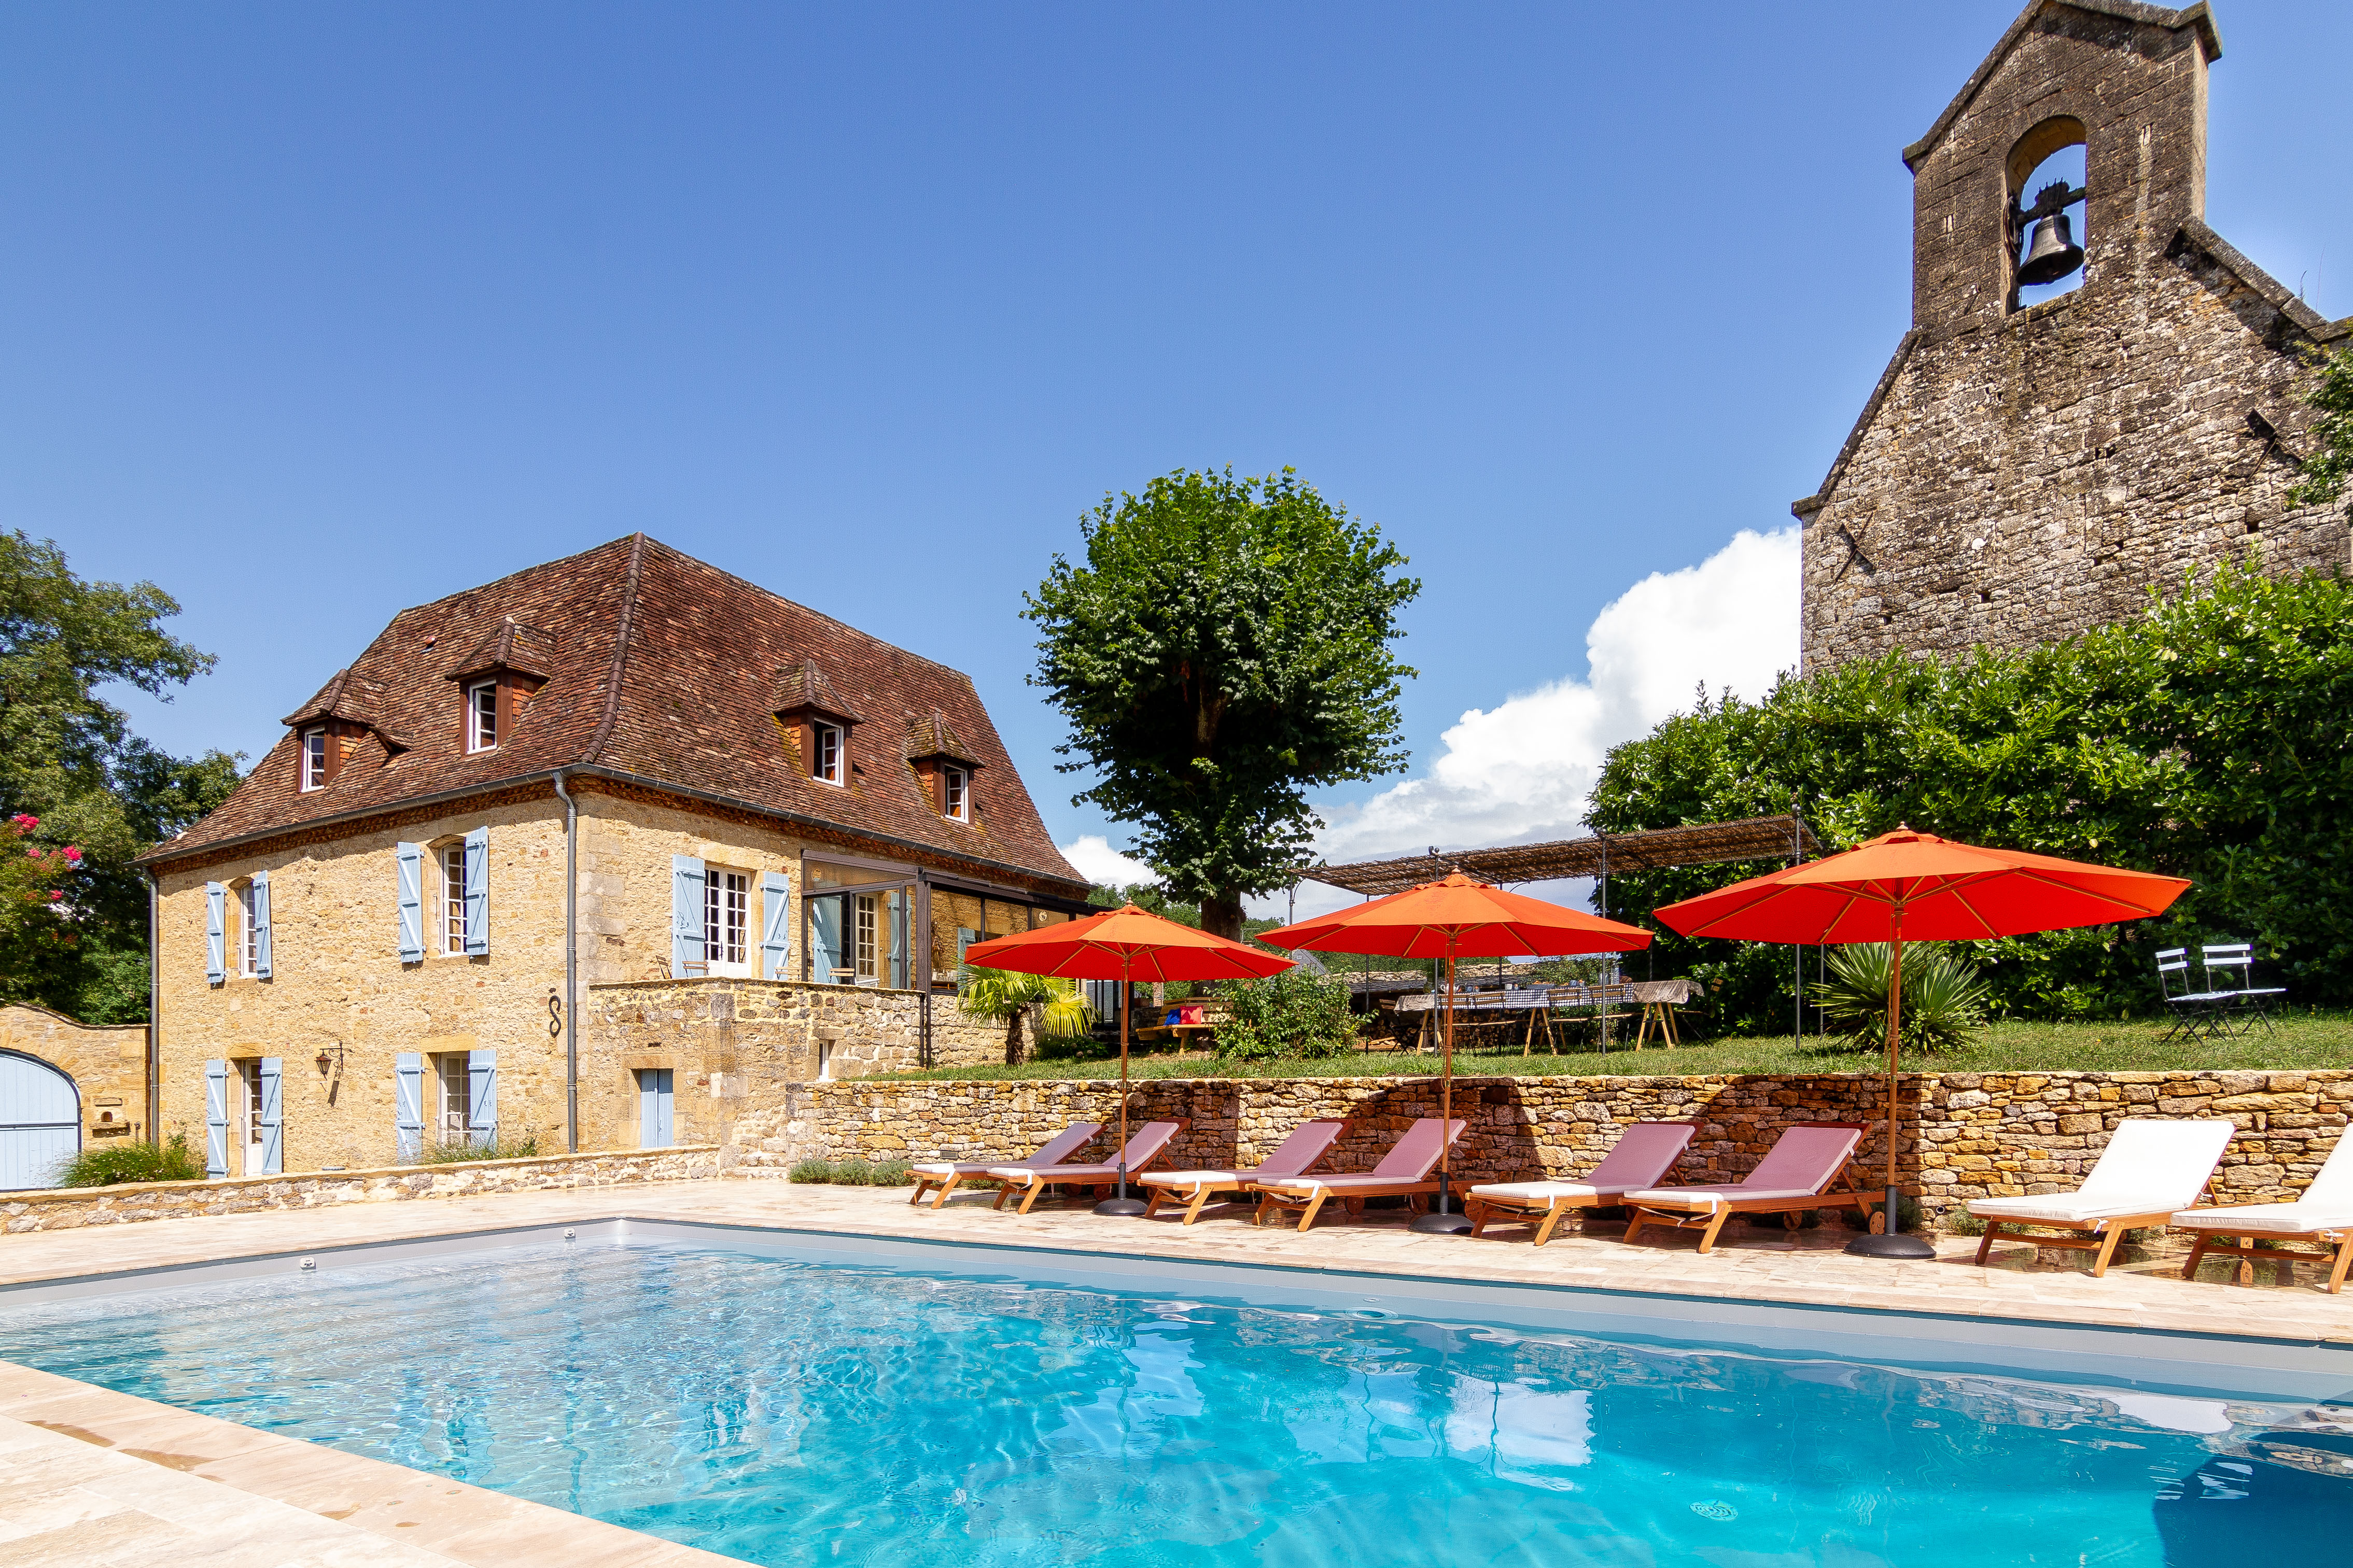 Introducing Maison Agora - previously private sandstone French country house recently refurbished for rental